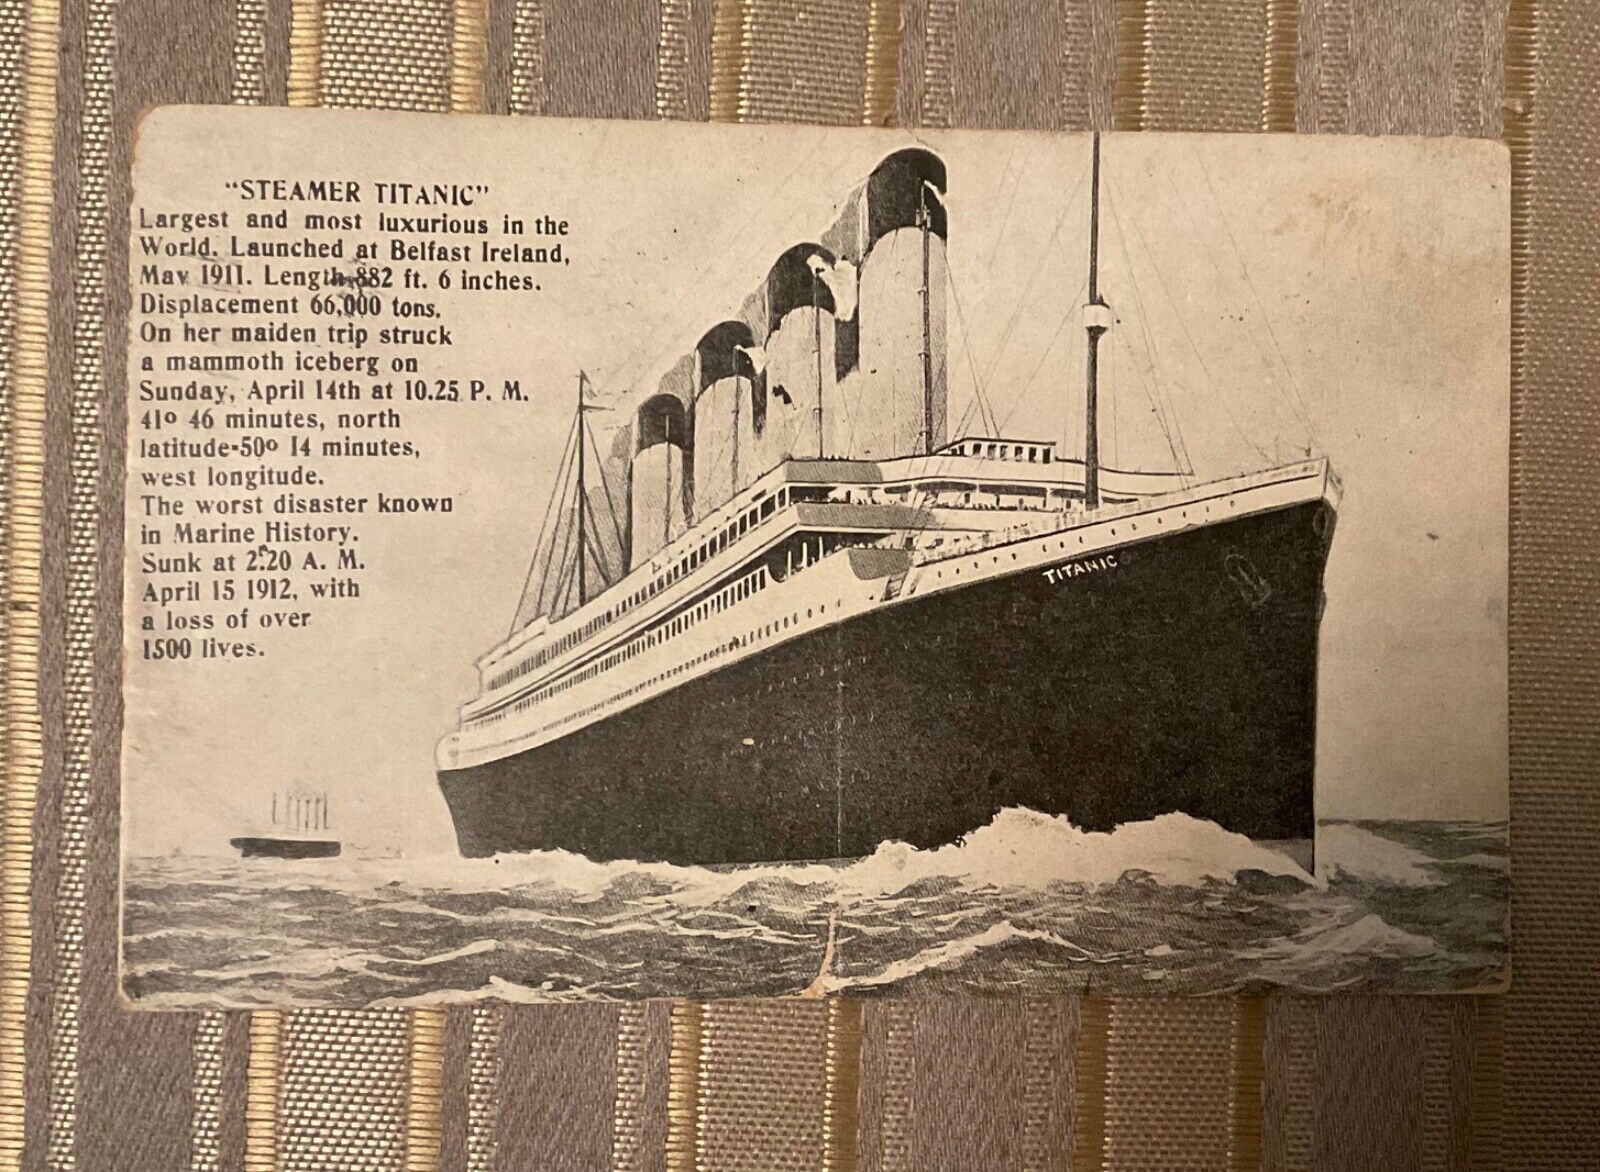 RARE TITANIC POSTCARD POSTMARKED 1 MO. MAY 14, 1912 1-CENT STAMP WHITE STAR LINE